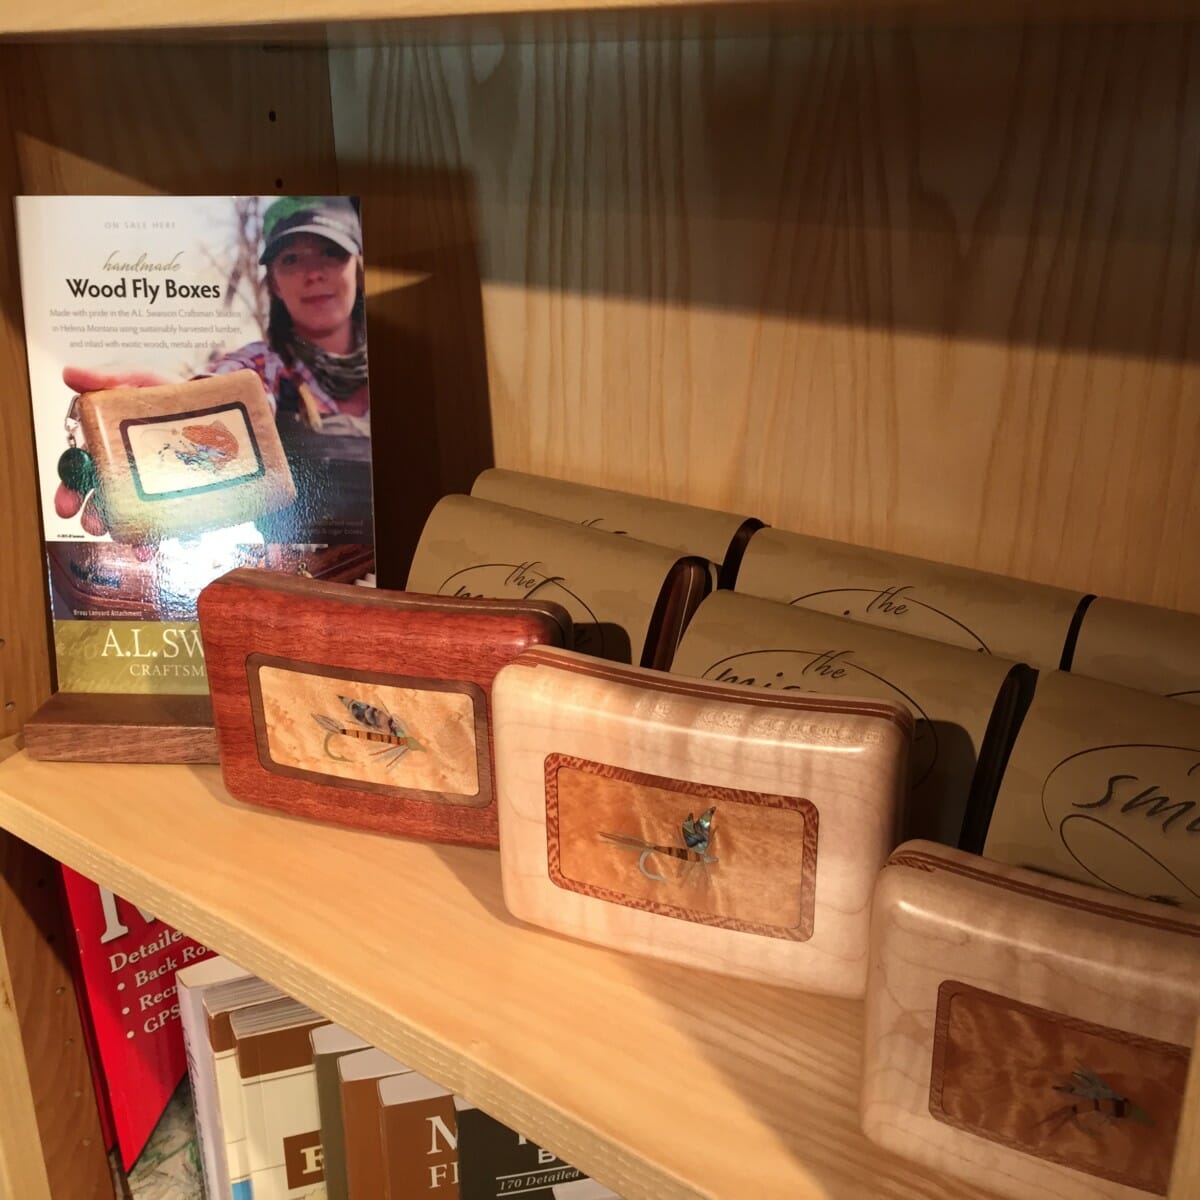 River Series handmade wood fly boxes from A.L. Swanson Craftsman Studio in Helena Montana. Available now at Wolf Creek Angler. 